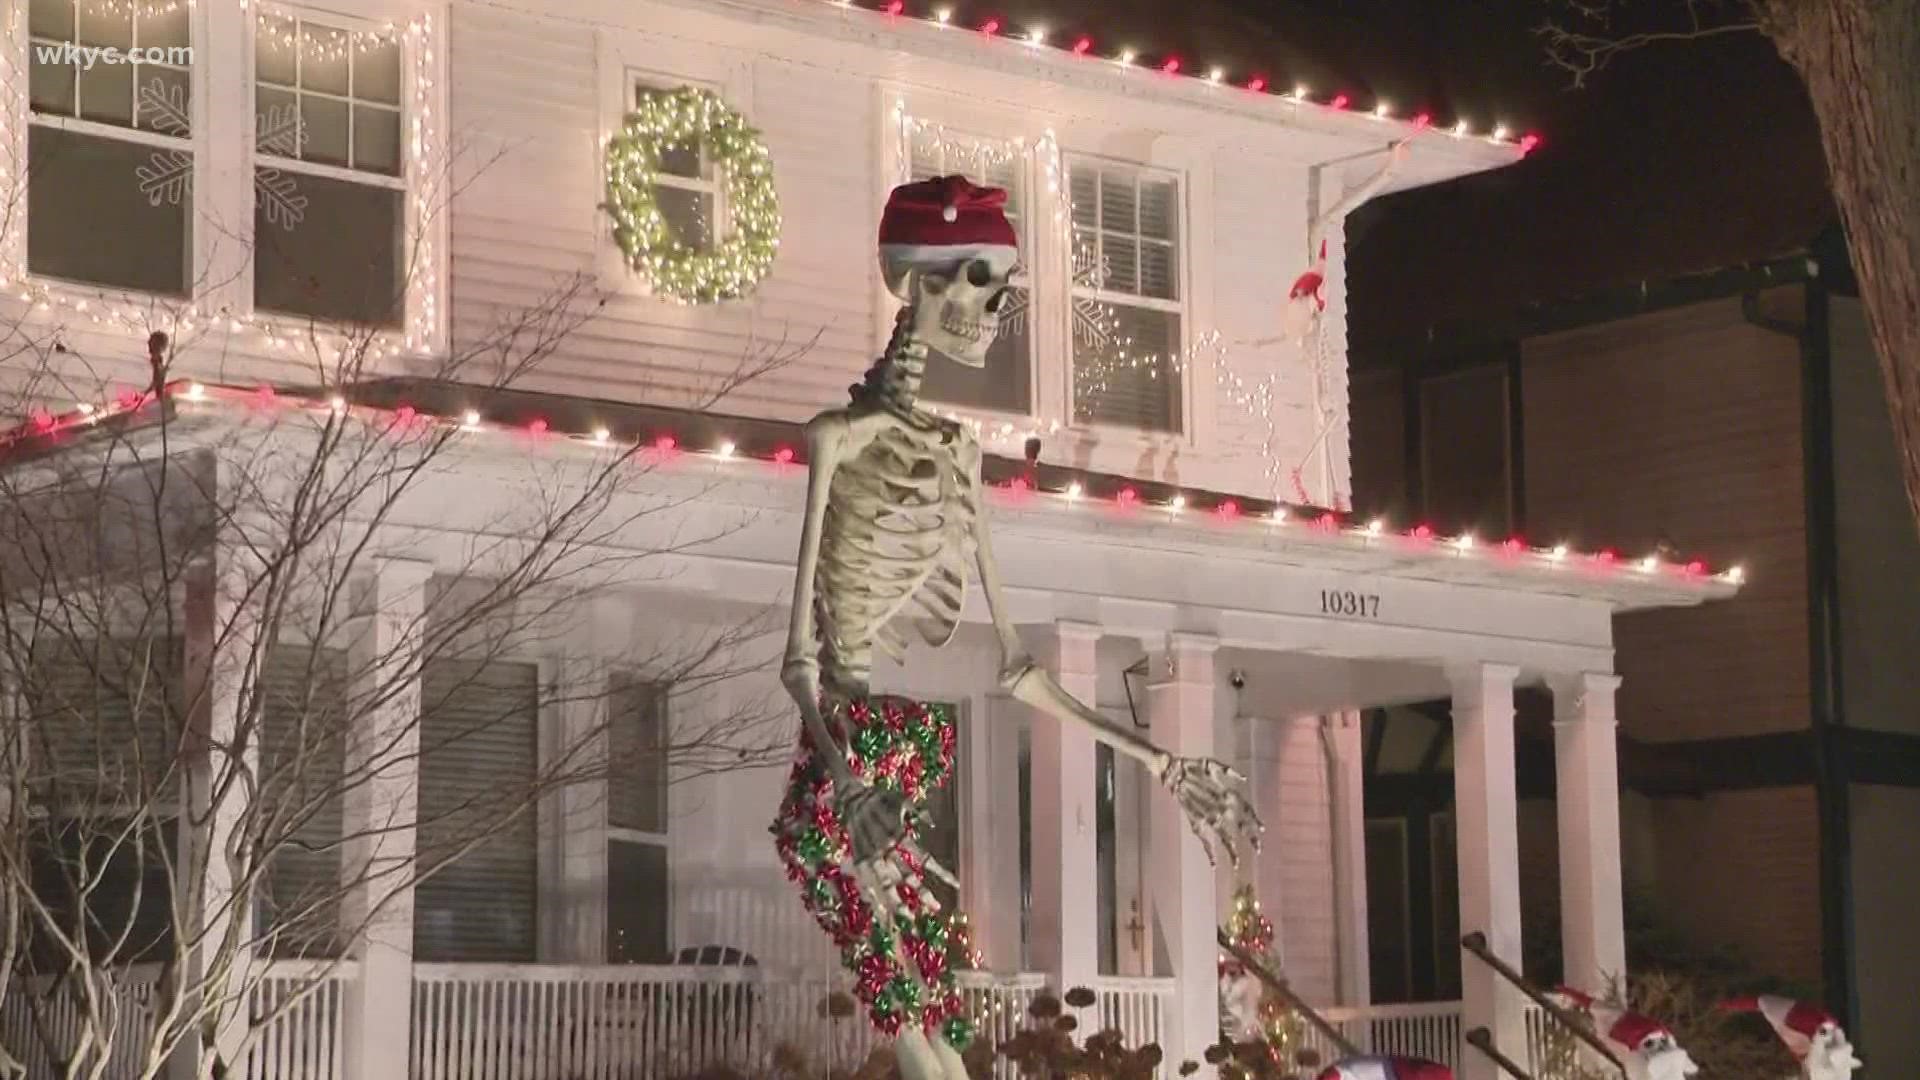 Check this out! A family in the Cleveland area has decorated their home on Clifton Boulevard for Christmas with a 12-foot-tall skeleton.